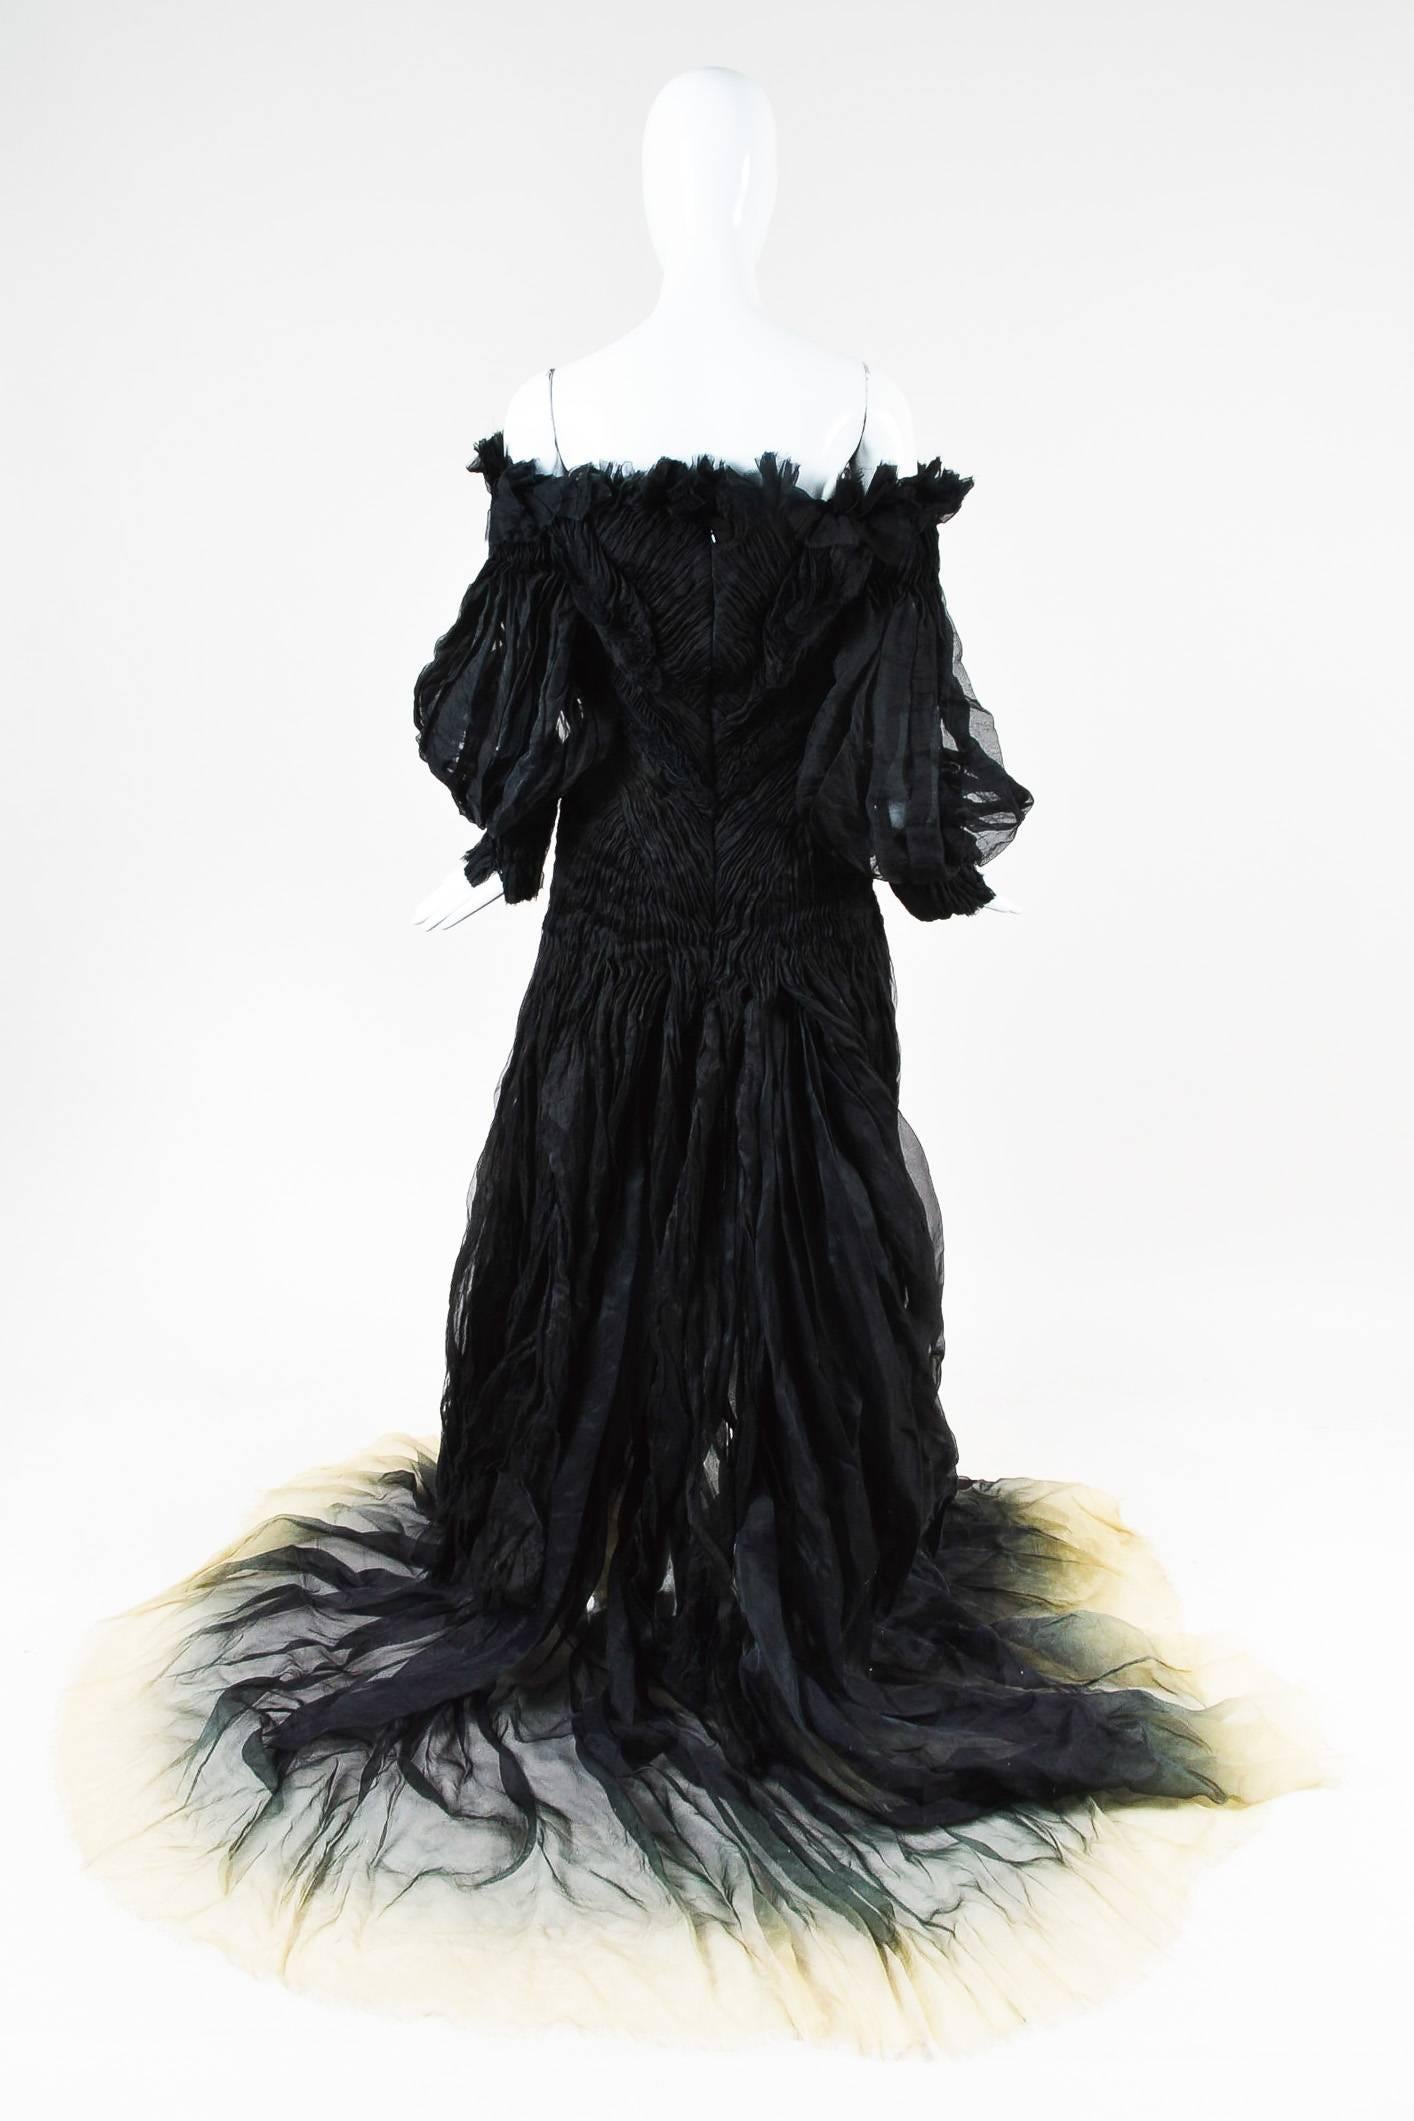 Alexander McQueen SS11 Runway Black Cream Silk Ombre Ruched Dress Gown SZ 44 In Good Condition For Sale In Chicago, IL